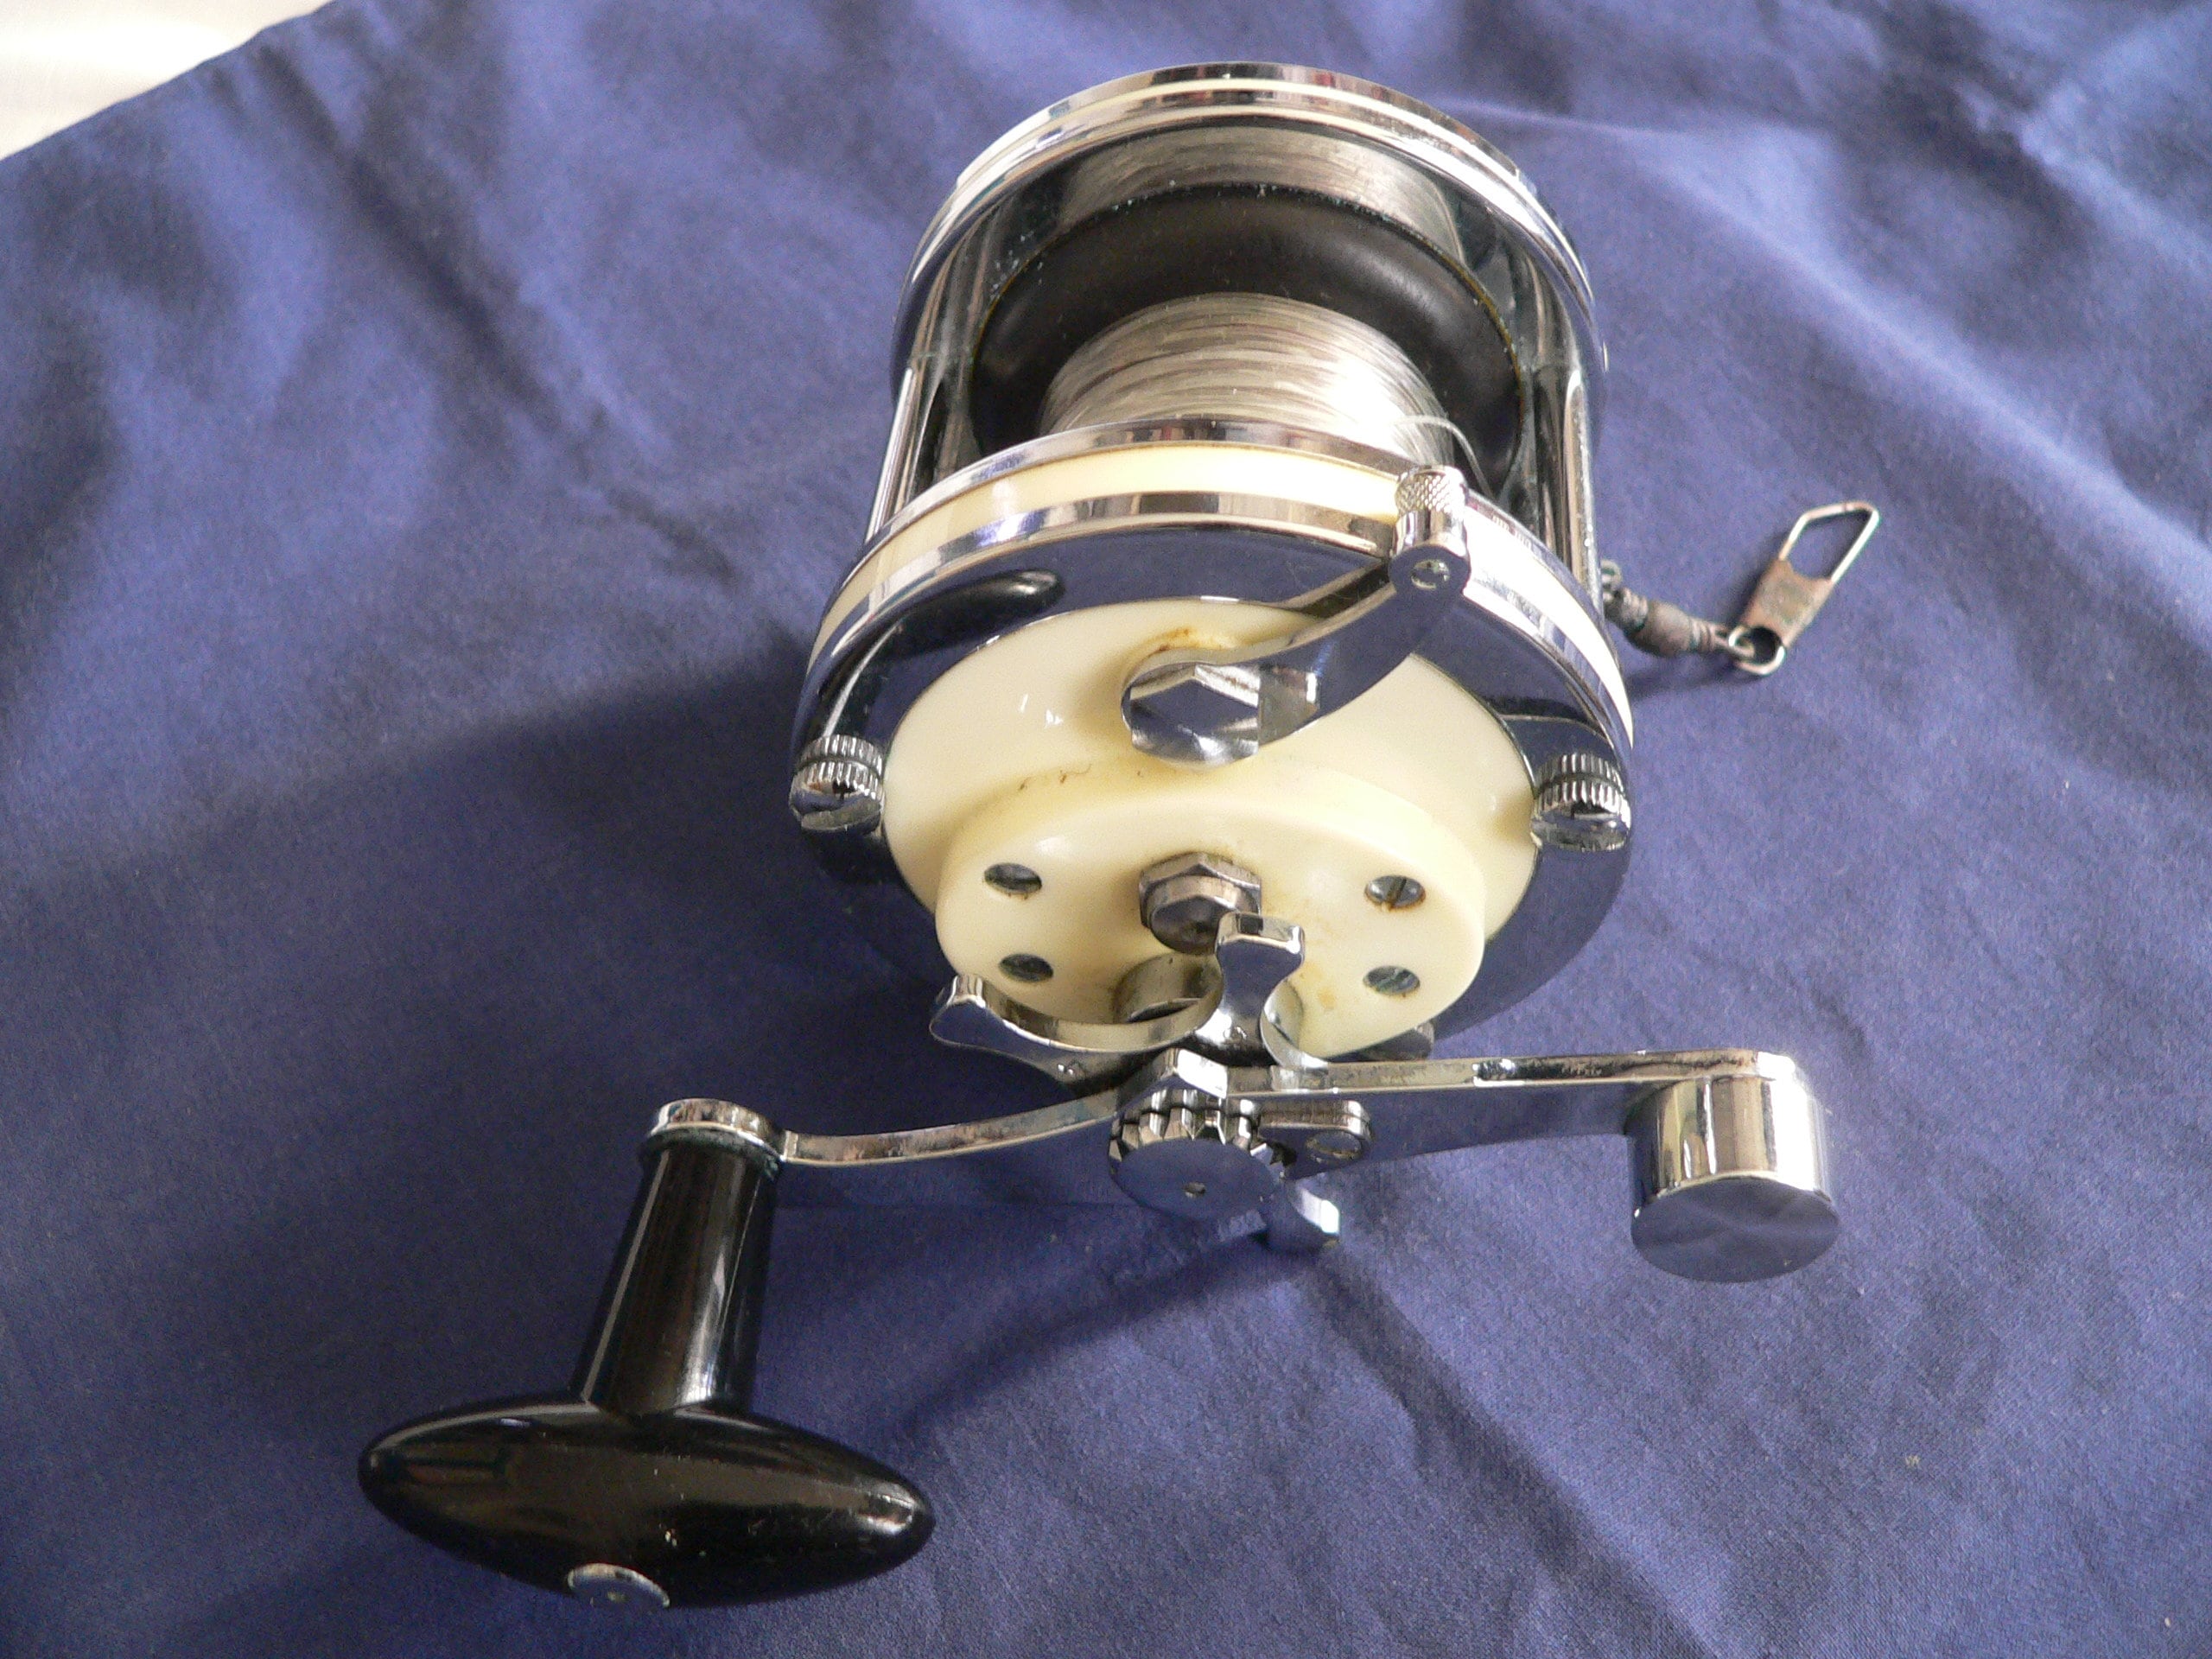 Vintage Alcedo Micron Ultralight Spinning Reel W/box & Papers Made in Italy  -  Israel